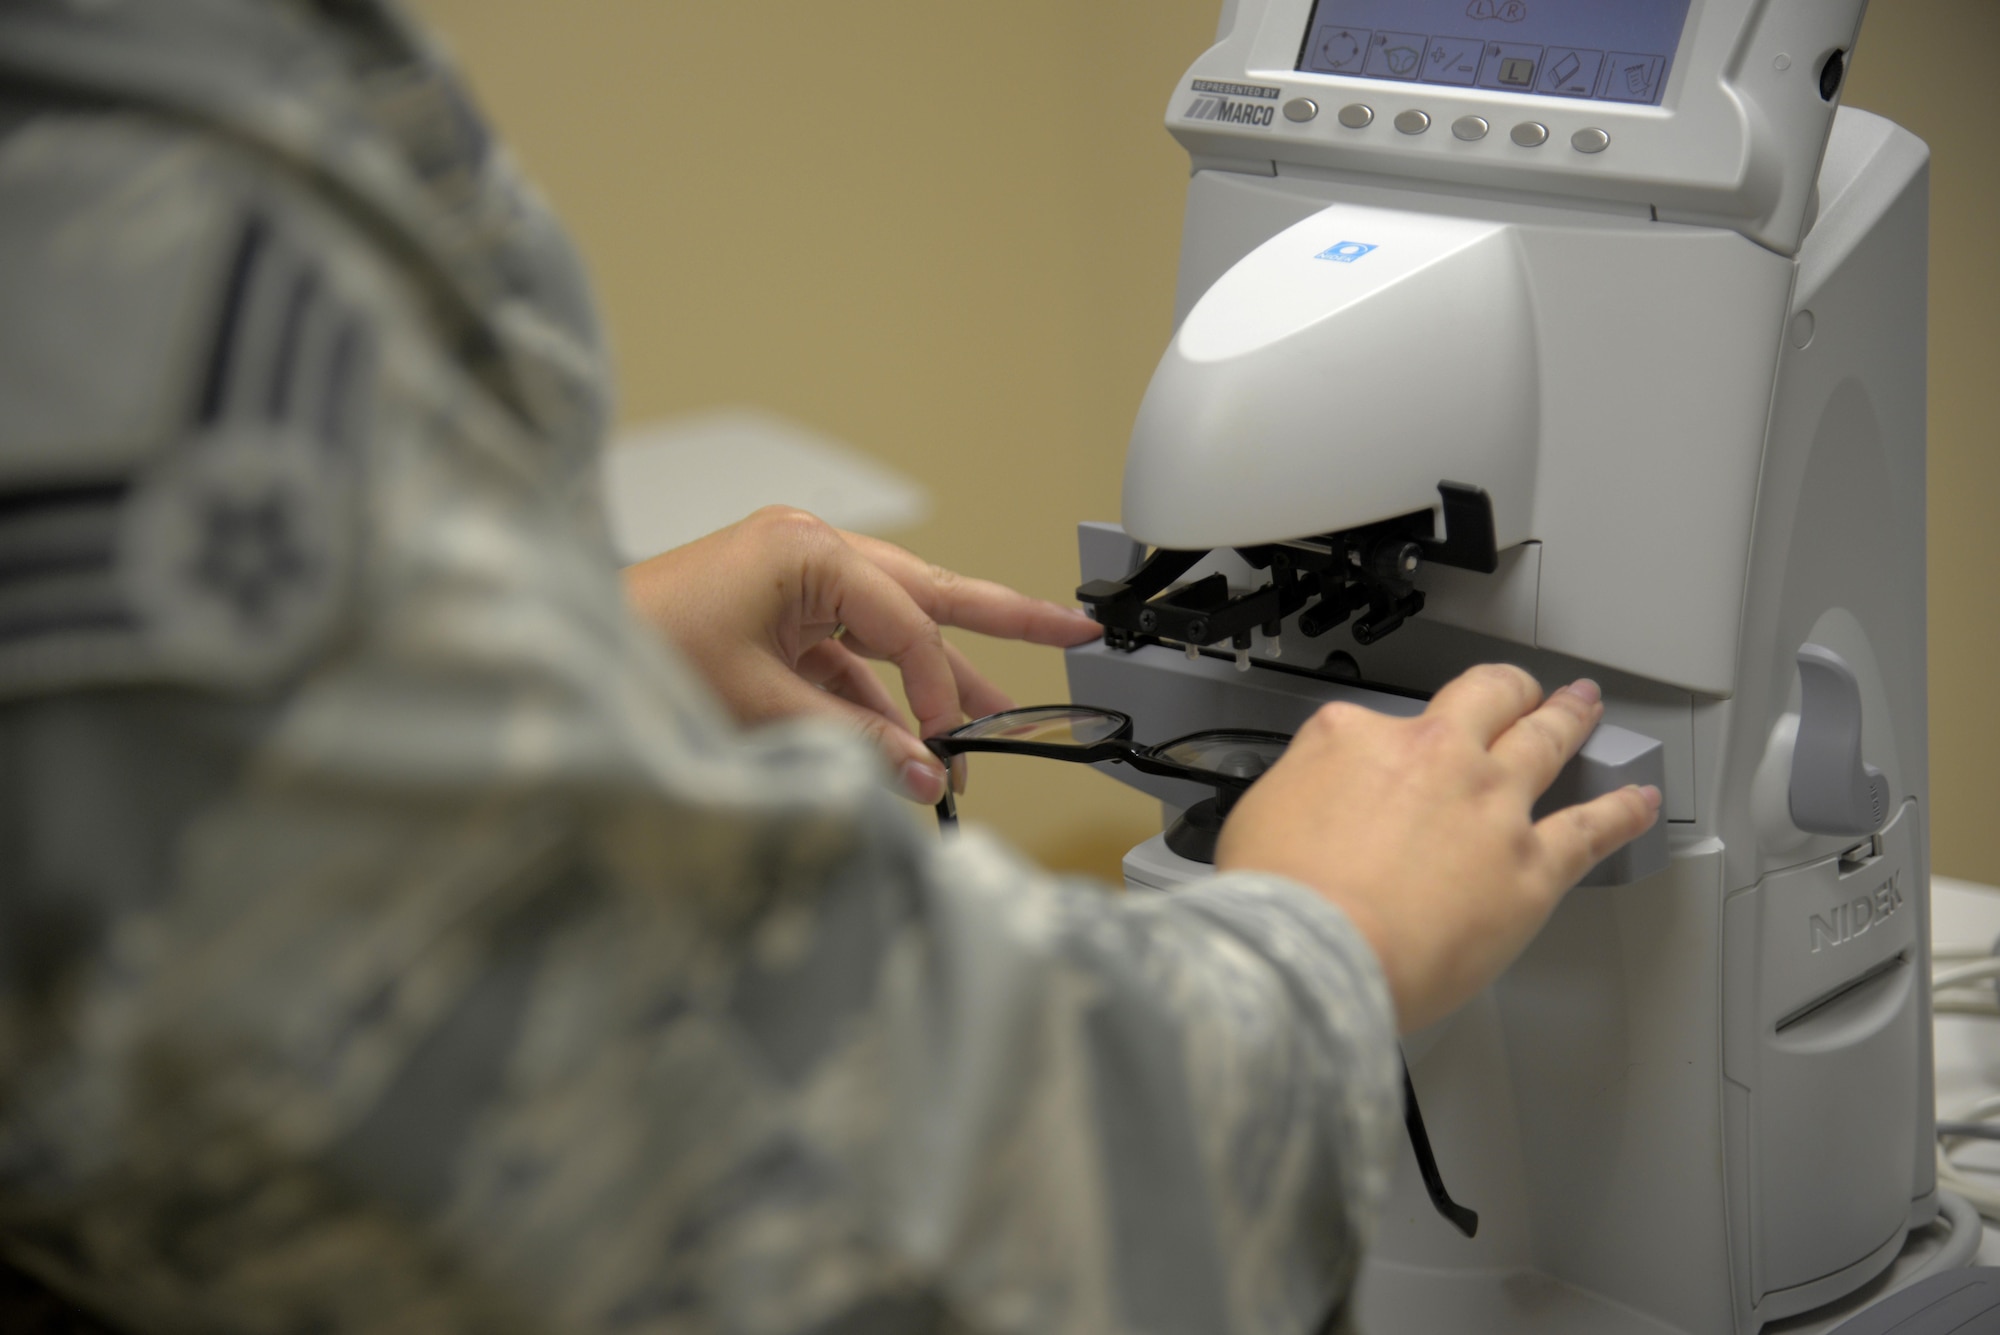 U.S. Air Force Senior Airman Sarai Boehm, an ophthalmic technician assigned to the 6th Aerospace Medical Squadron, checks prescription glasses using a Lensometer at MacDill Air Force Base, Fla., Oct. 17, 2017.